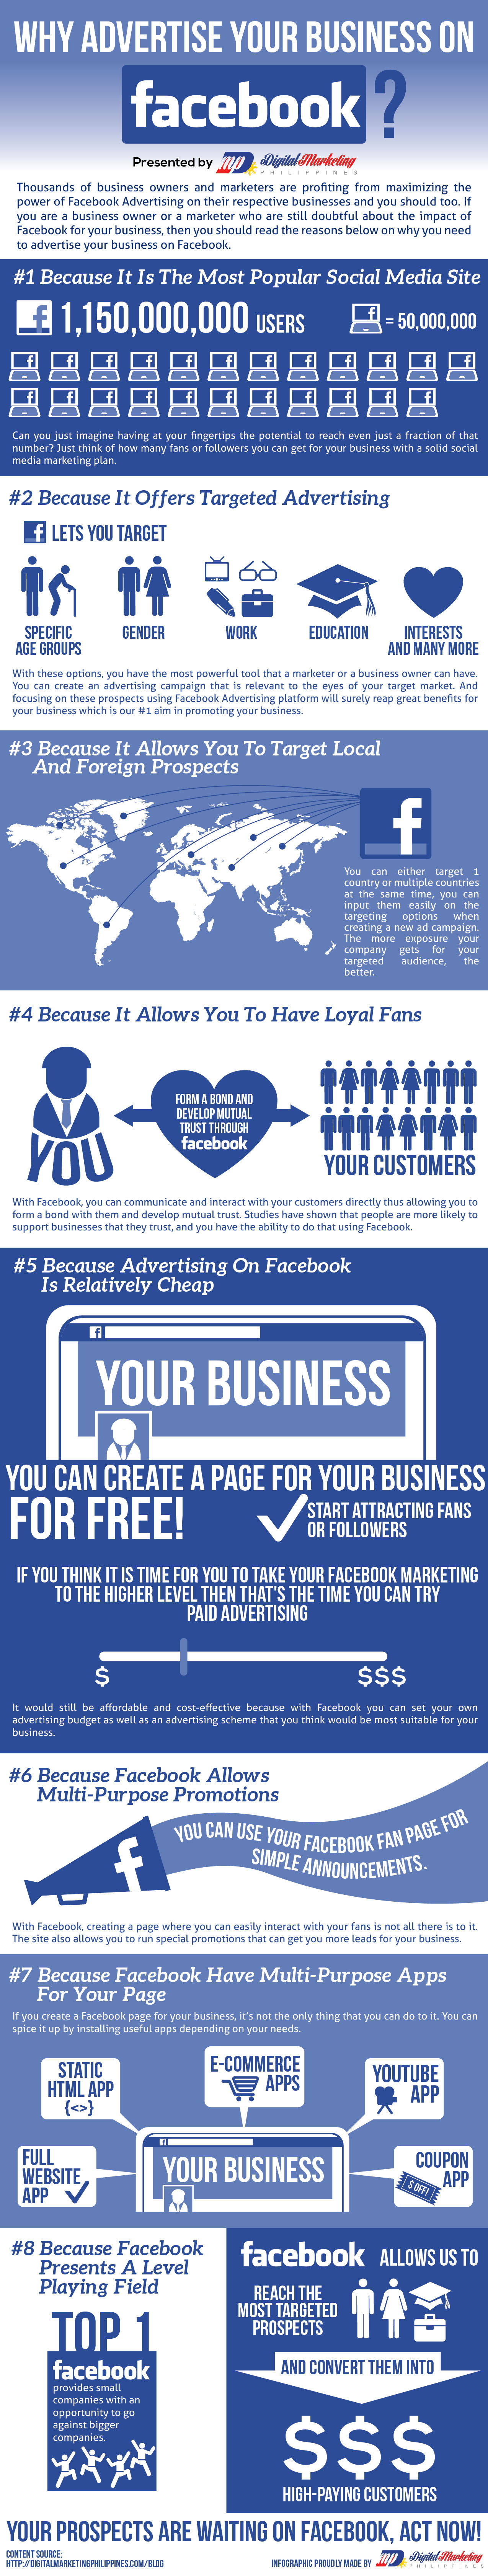 Why Advertise Your Business On Facebook